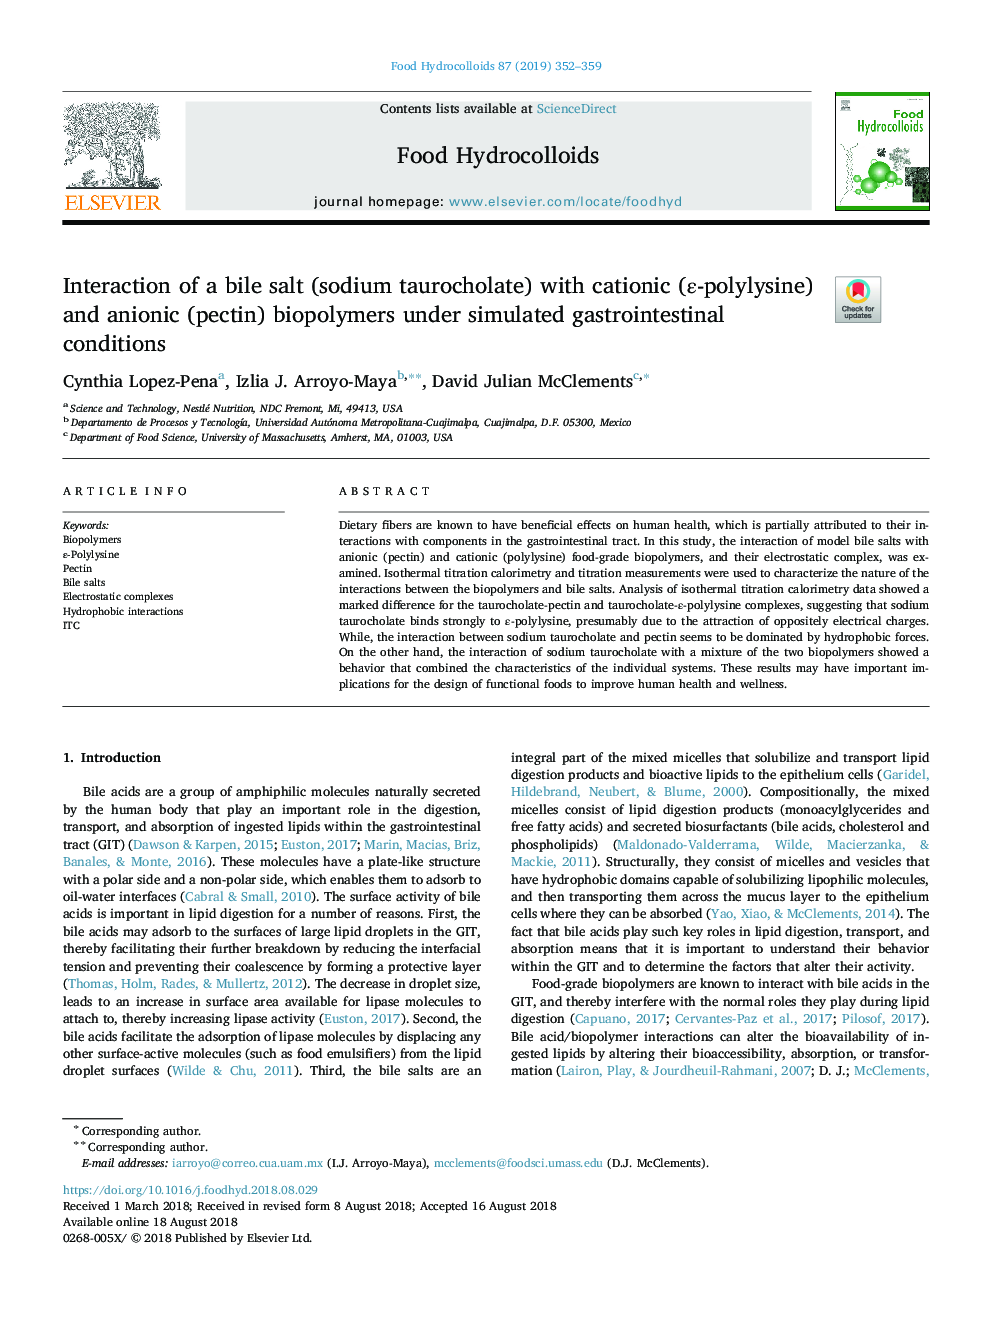 Interaction of a bile salt (sodium taurocholate) with cationic (Îµ-polylysine) and anionic (pectin) biopolymers under simulated gastrointestinal conditions